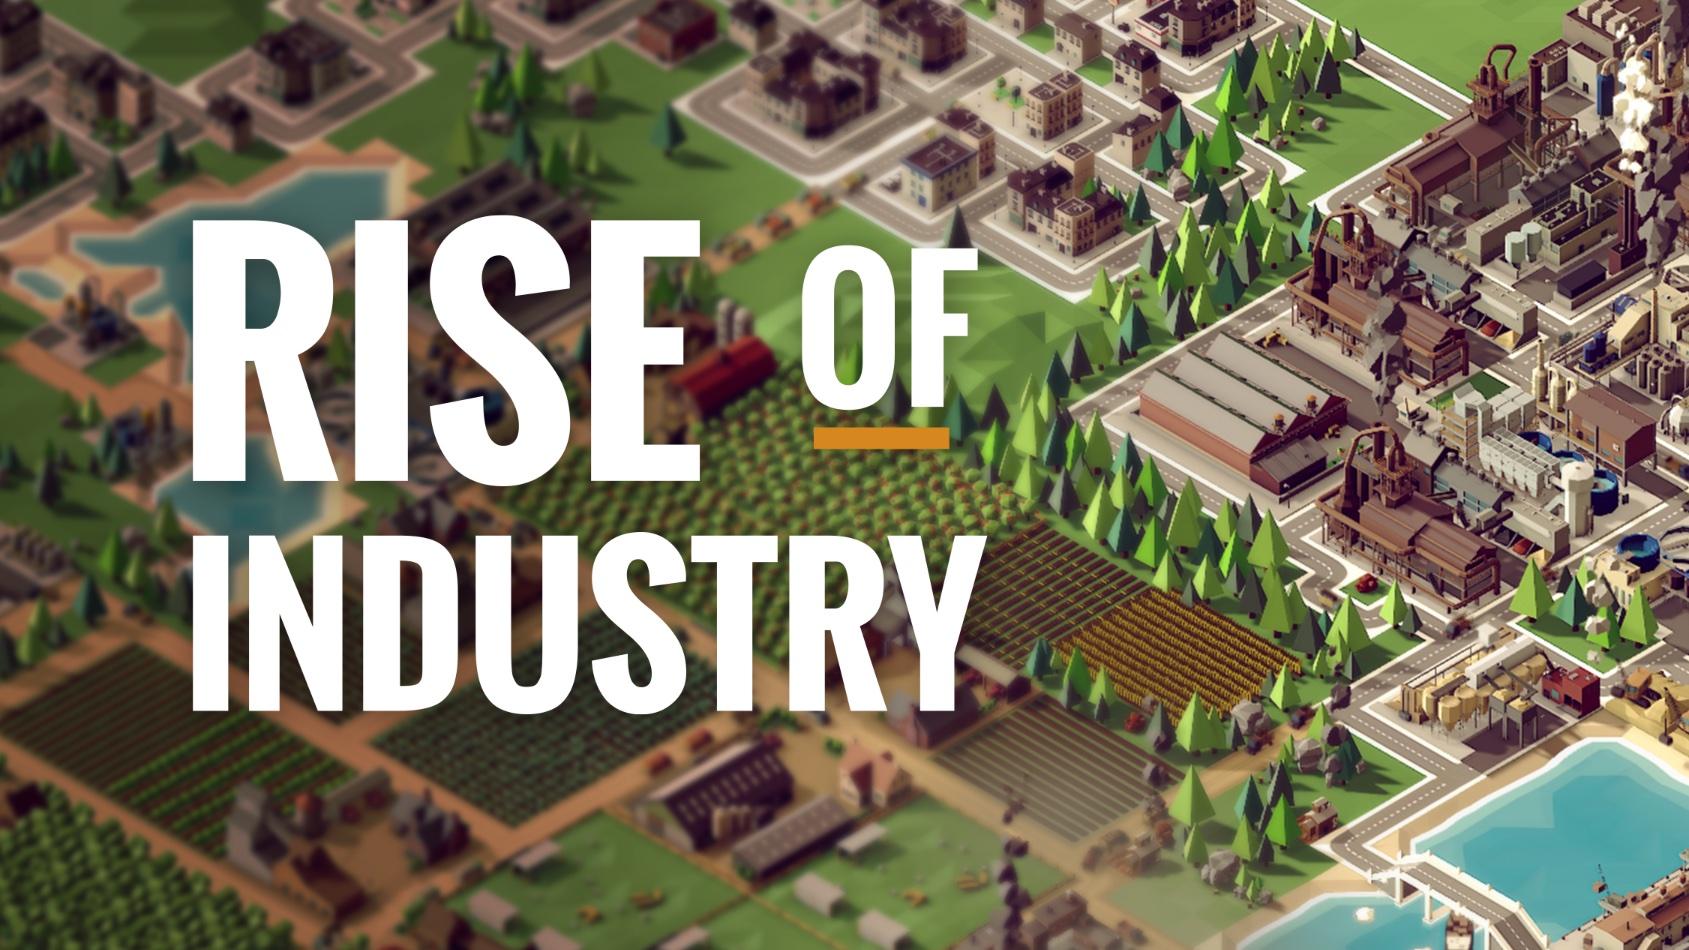 rise of industry